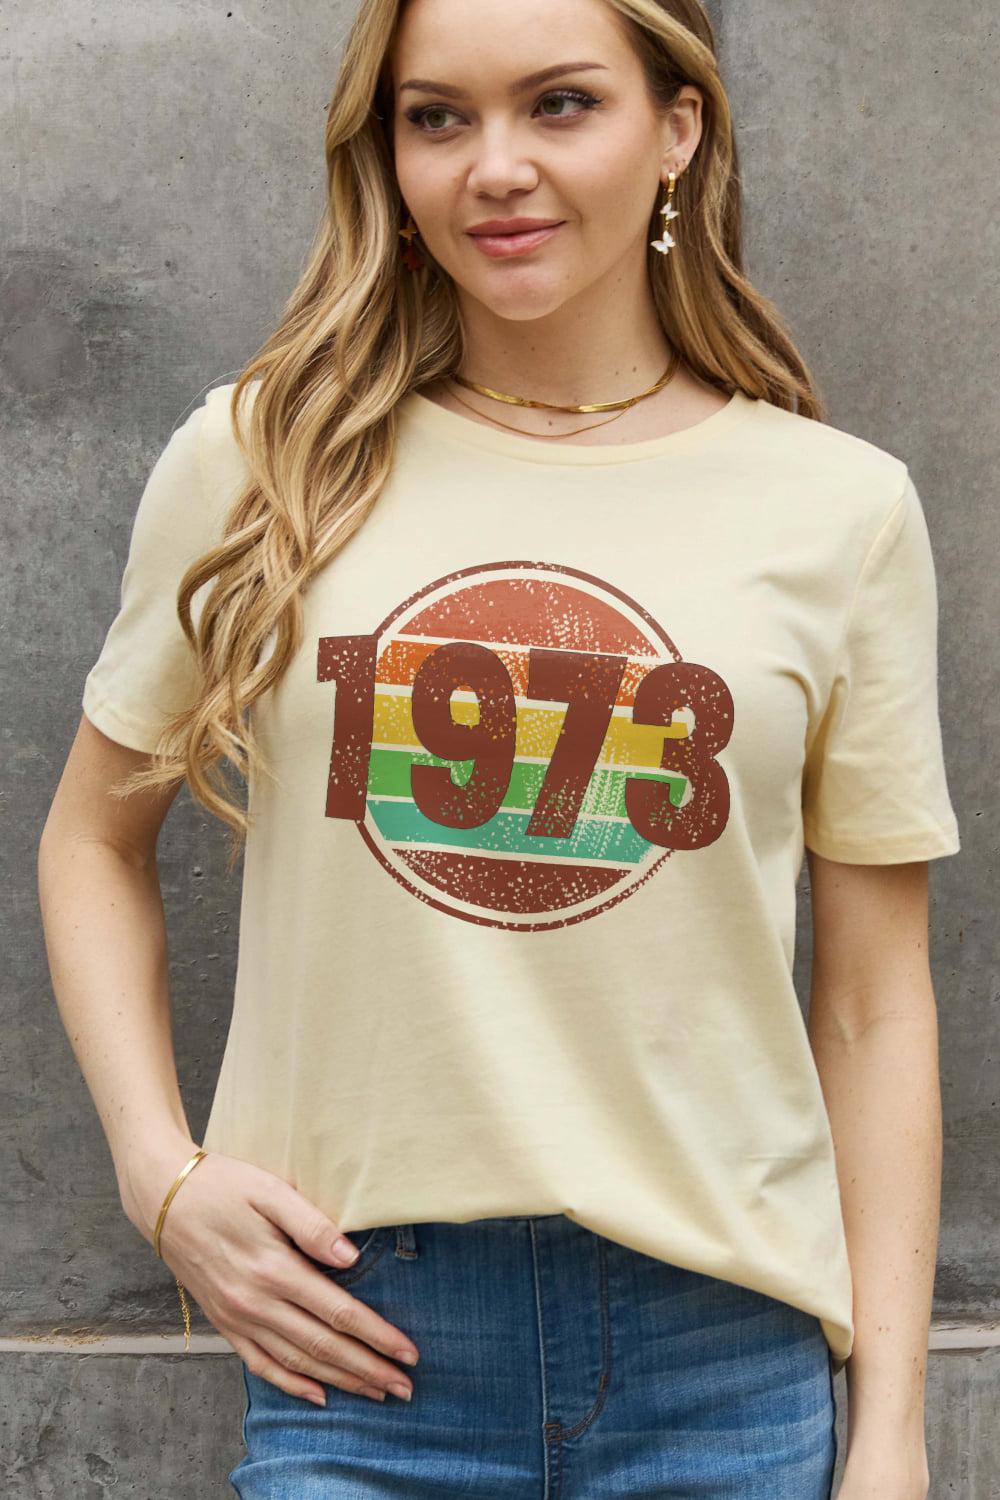 Simply Love Full Size 1973 Graphic Cotton Tee BLUE ZONE PLANET